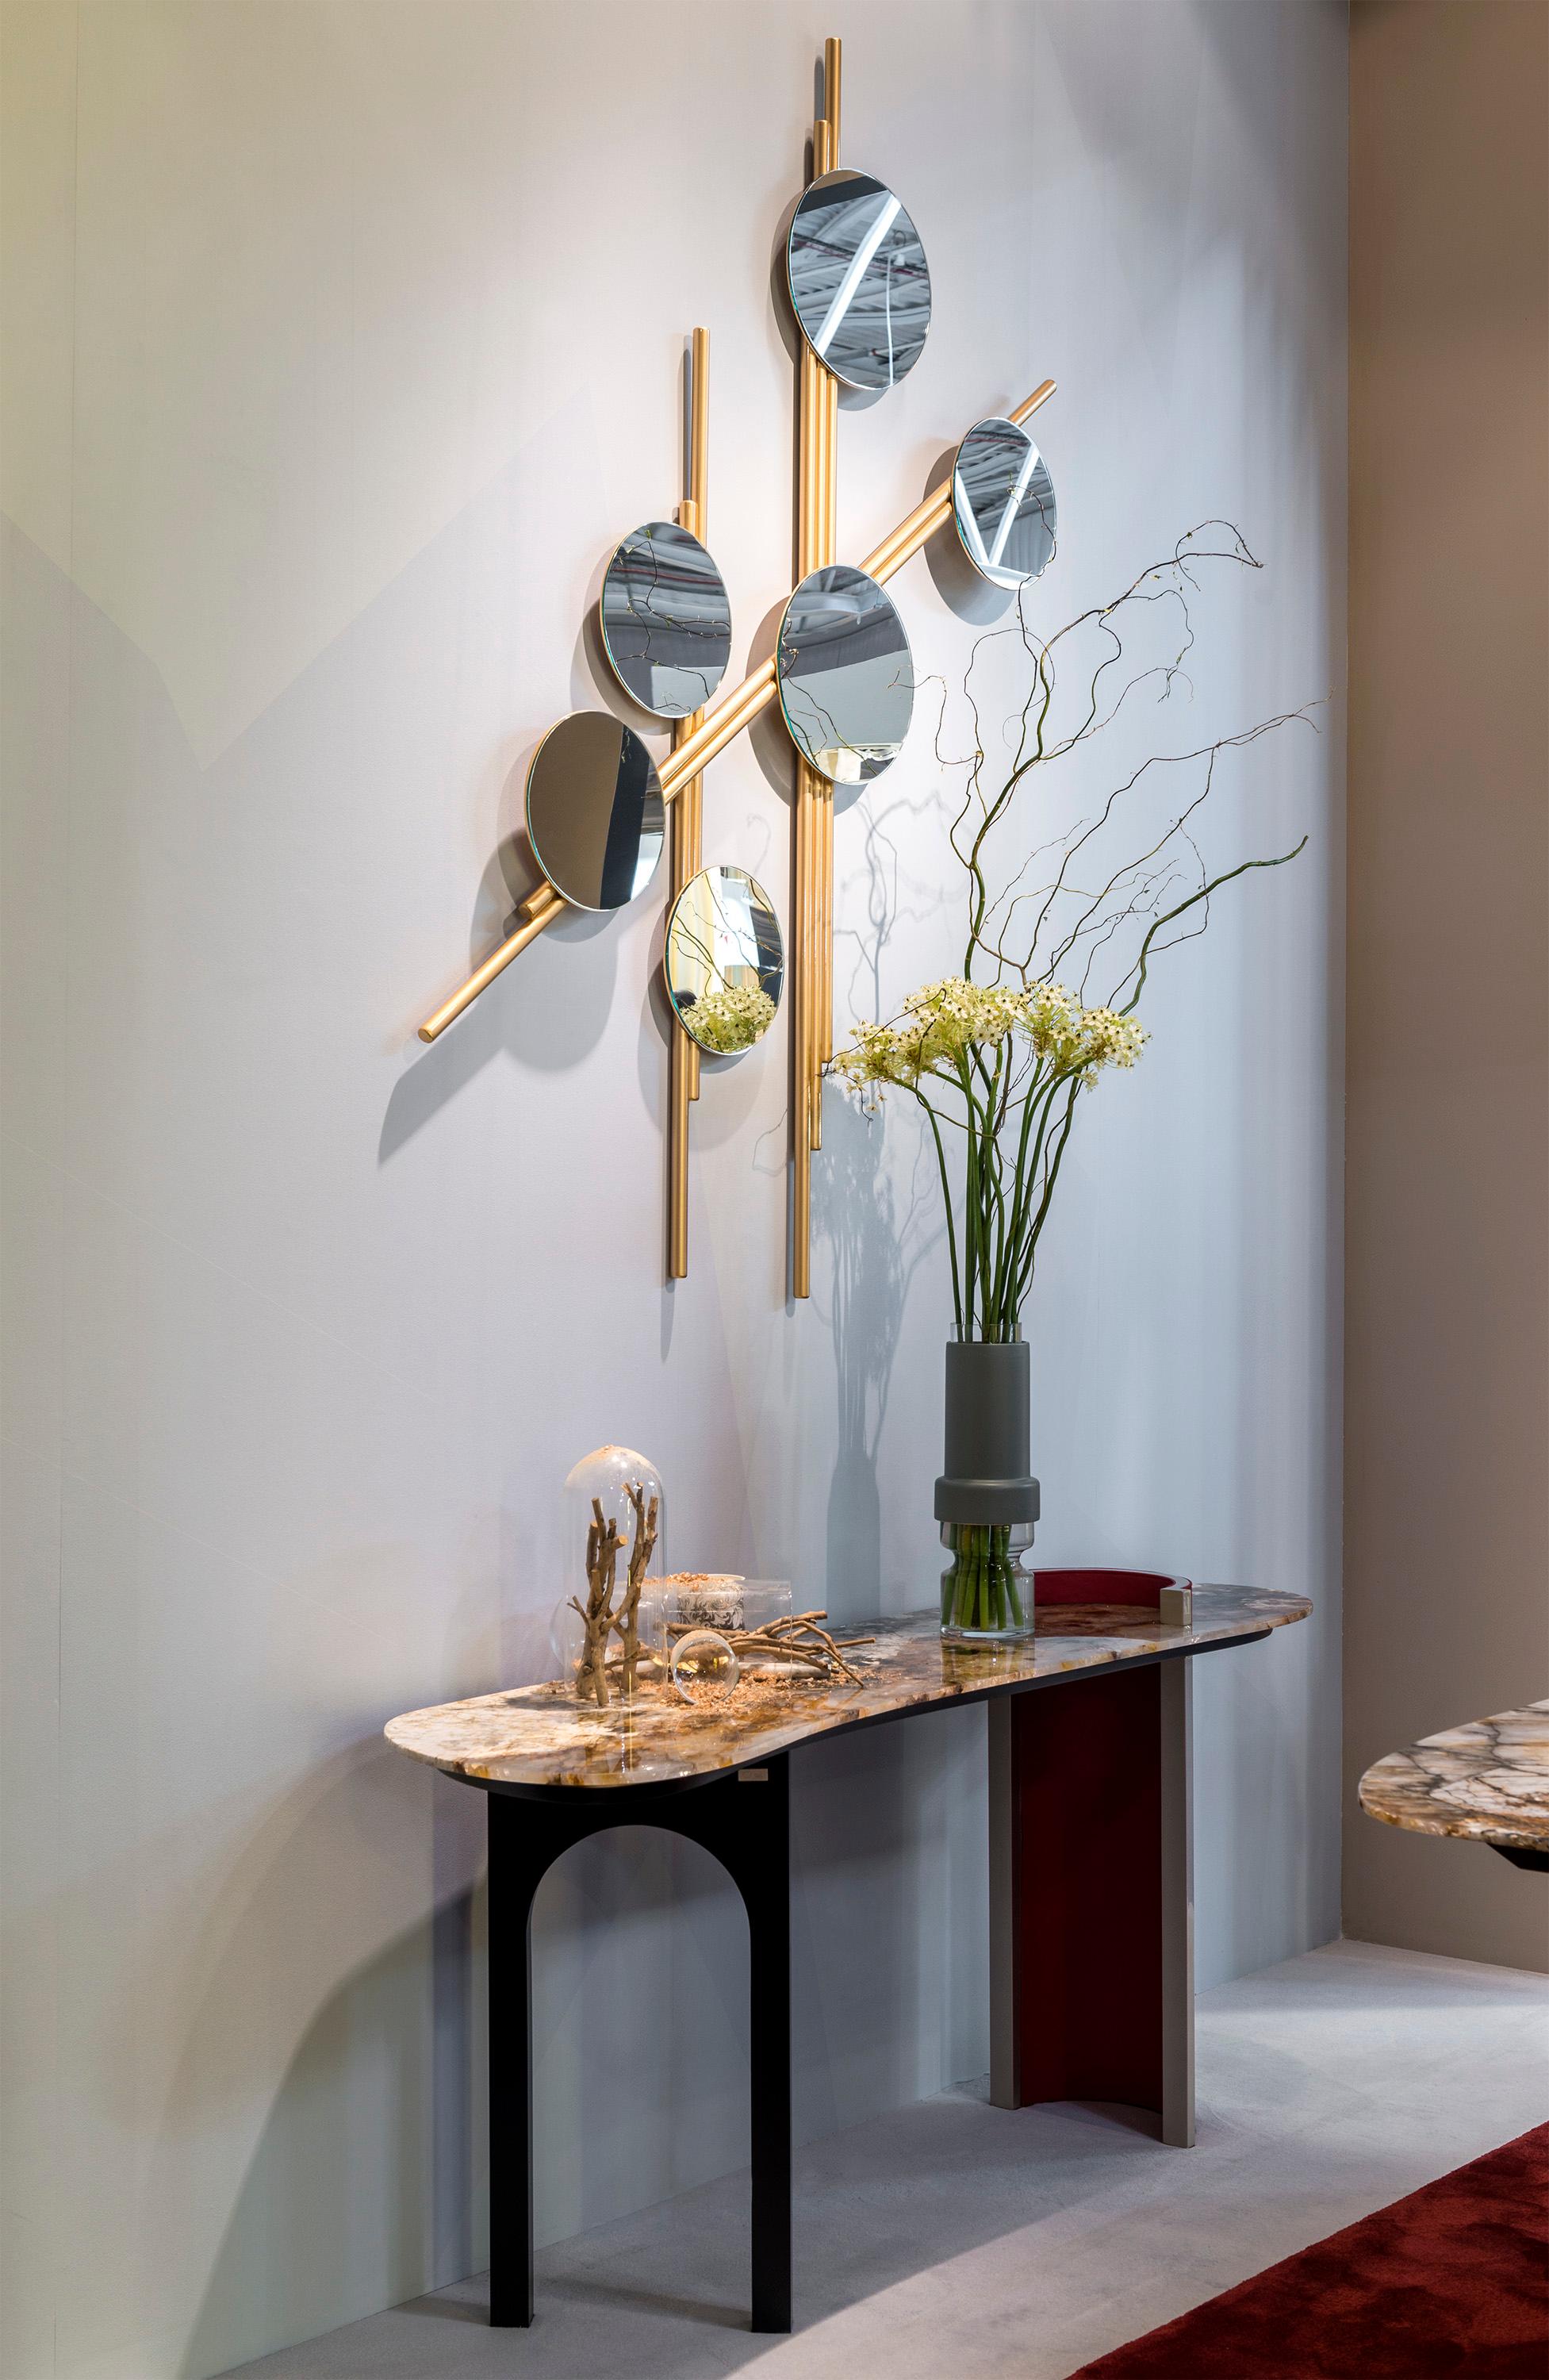 Flute Wall Mirror, Modern Collection, Handcrafted in Portugal - Europe by GF Modern.

The Flute wall mirror is a statement piece that brings harmony to any space, requiring no musical sheet for one to appreciate its design. Crafted in polished